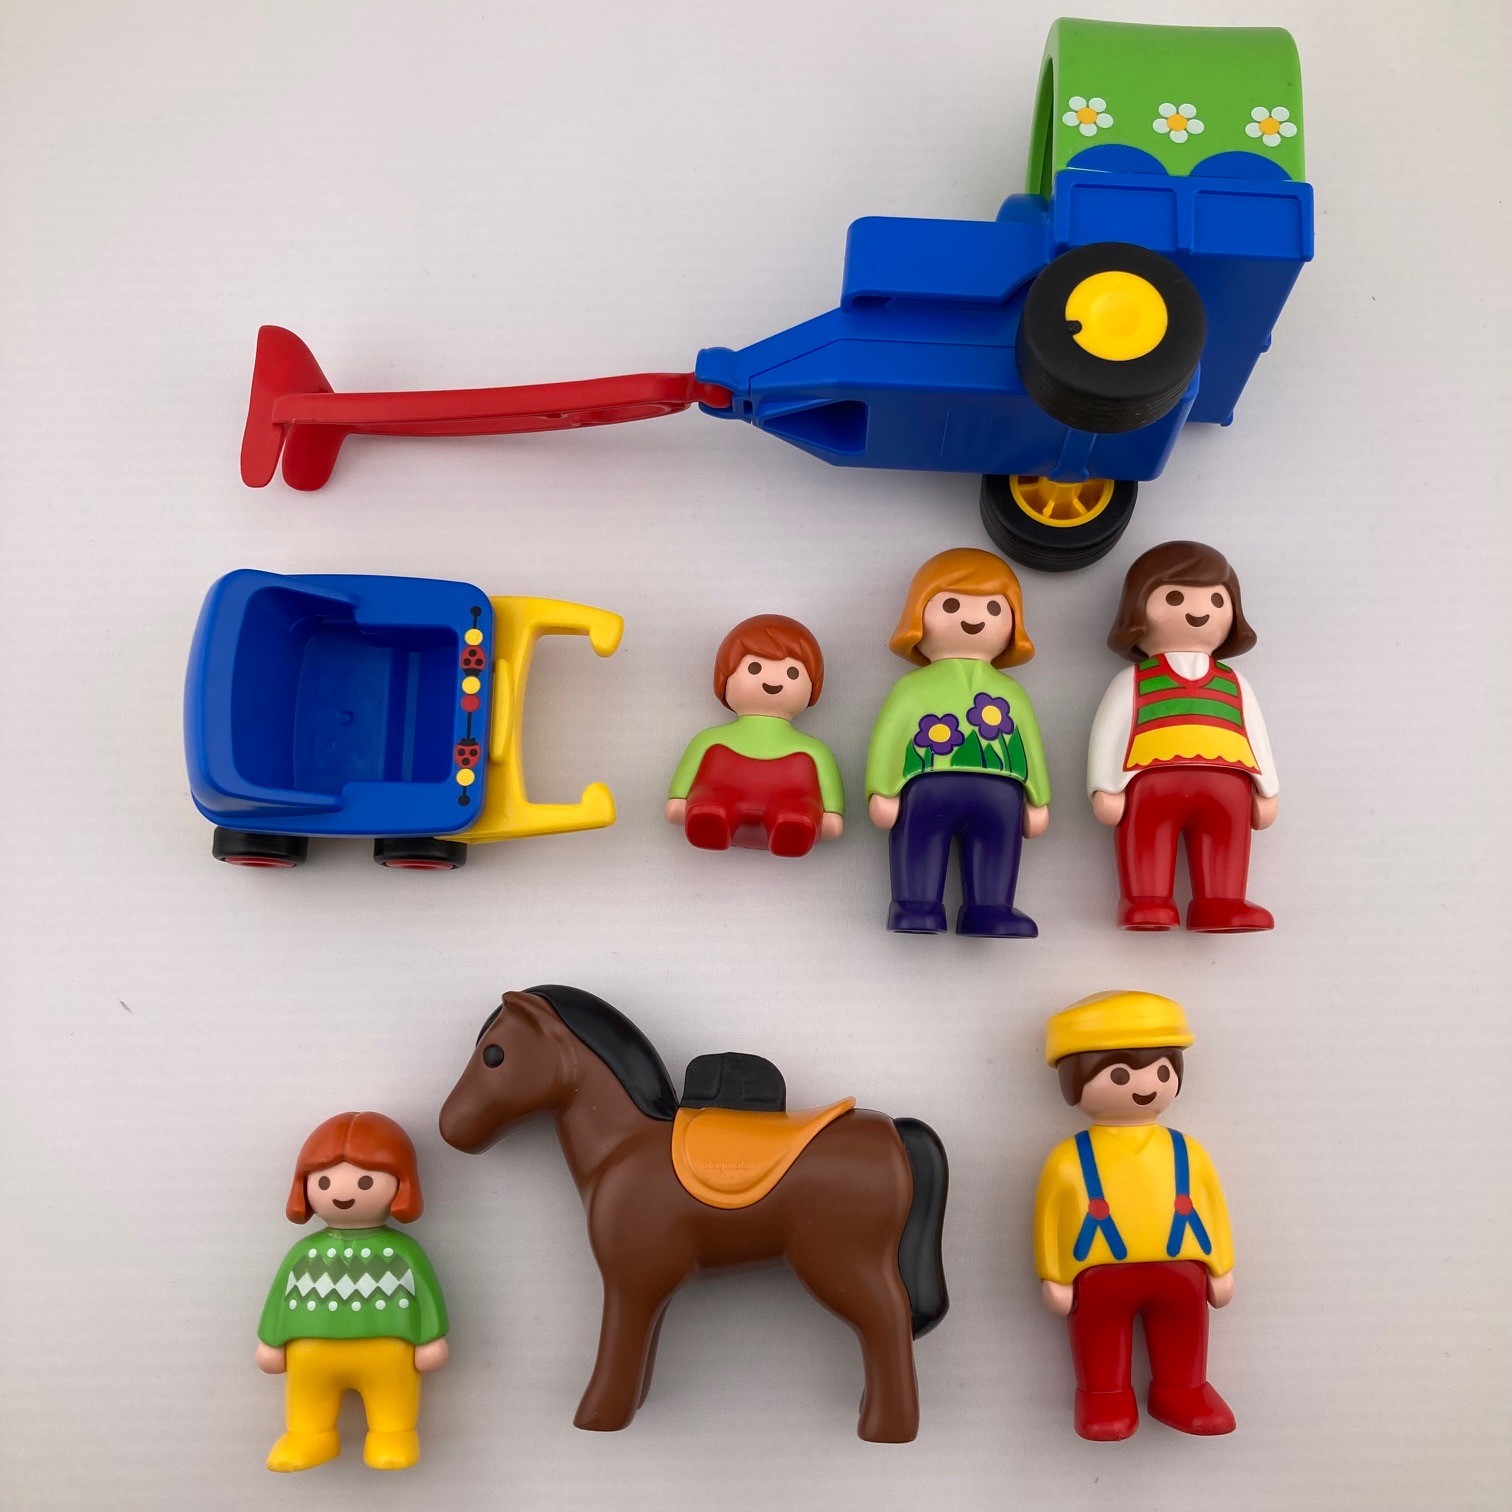 https://www.decotoys.ch/images/product_images/original_images/Playmobil-1.2.3-Kinderspass-B.jpg